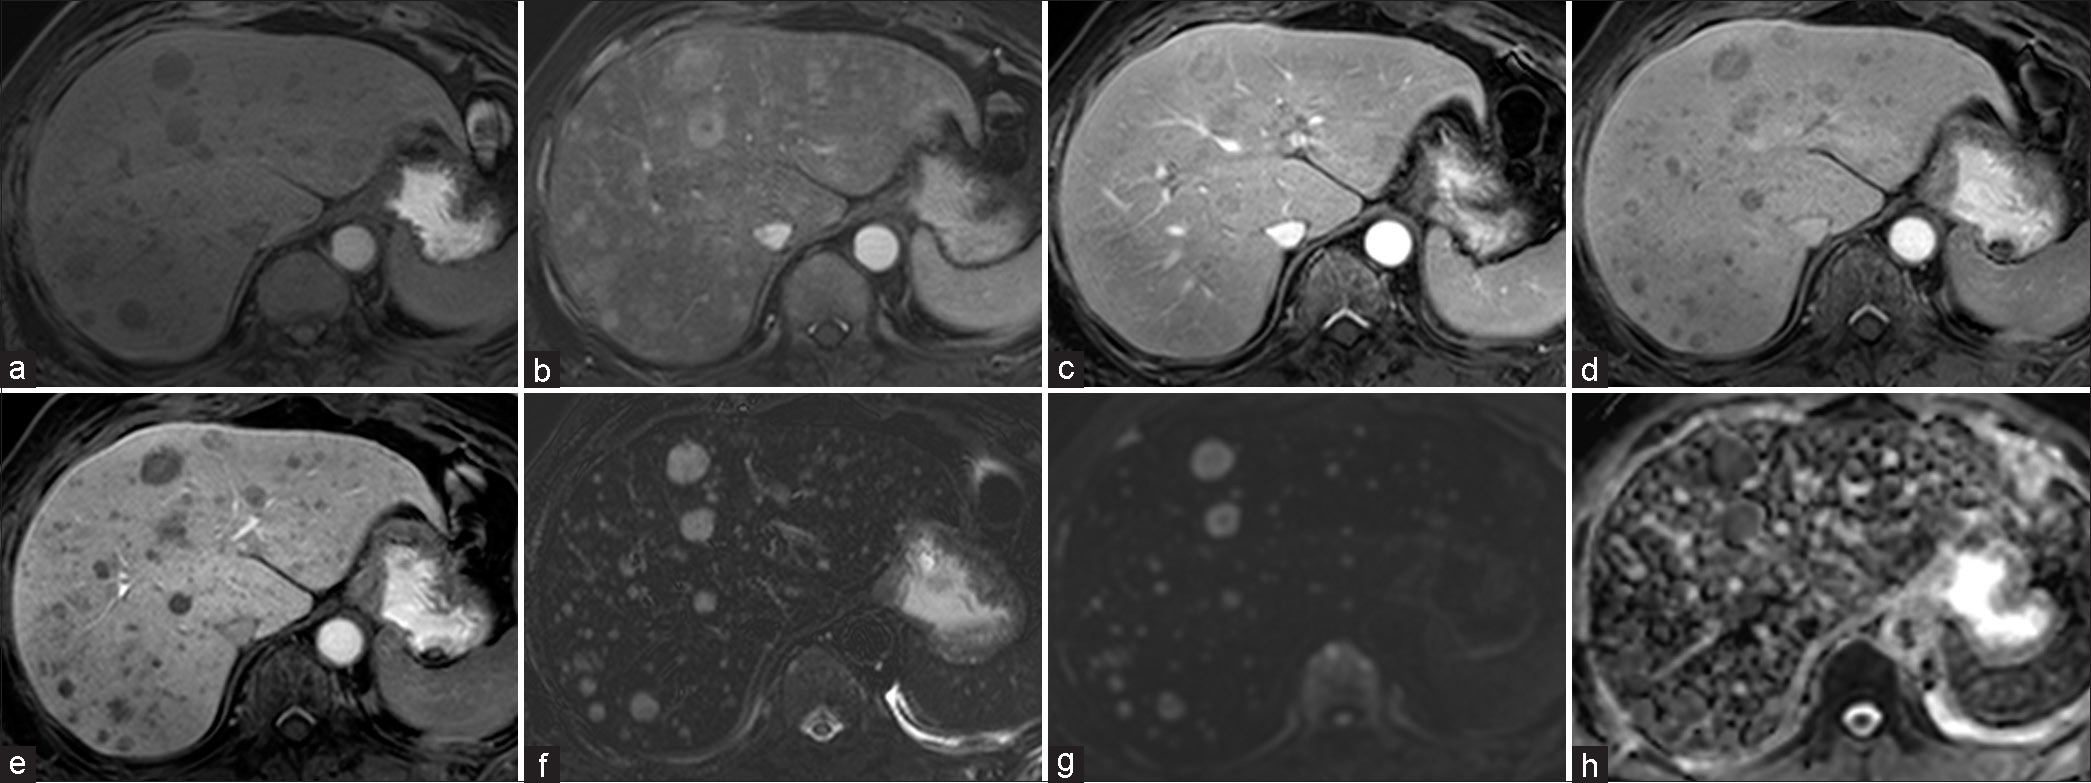 A 62-year-old woman with incidentally detected multiple hepatic lesions. (a) On the axial fat-suppressed T1-weighted magnetic resonance (MR) images, the innumerable well-defined nodular lesions showed hypointensity relative to the background liver tissue. (b) Dynamic contrast-enhanced MR images, the hepatic lesions showed arterial enhancement (c-d) and had washout enhancement pattern in portal and delayed phase. (e) On the hepatobiliary phase, the hepatic lesions showed low signal intensity. (f) On the axial fat-suppressed T2-weighted MR images hepatic lesions showed hyperintensity. (g) Diffusion weighted image (DWI) at b-value of 800 s/mm2 reveal high signal intensity. (h) And an apparent diffusion coefficient (ADC) map reveal a low ADC value.